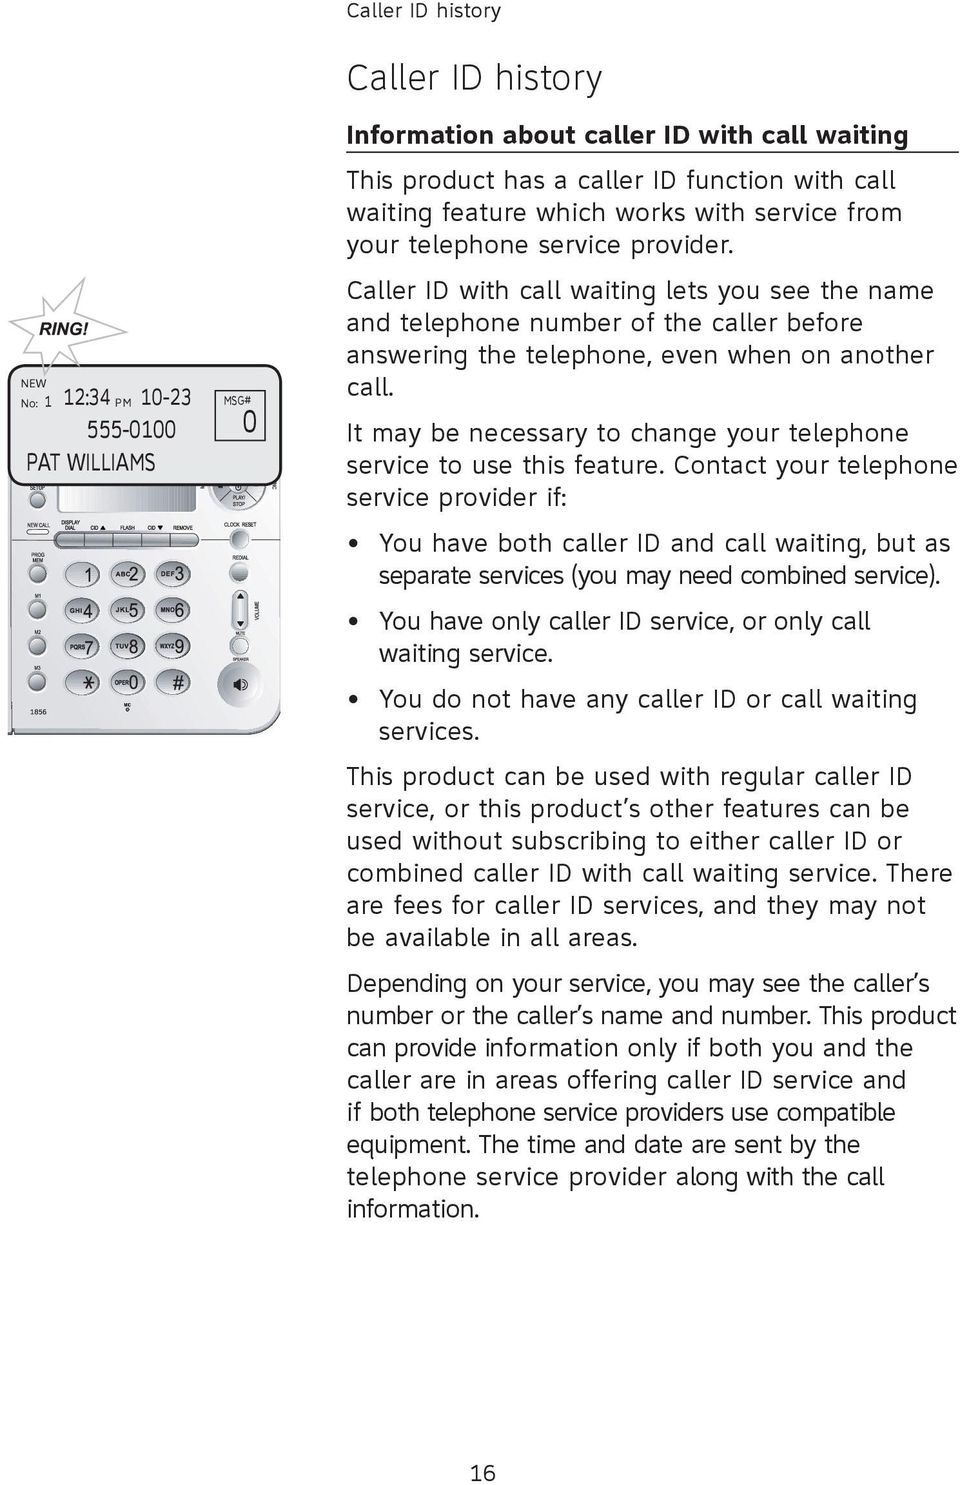 Caller ID with call waiting lets you see the name and telephone number of the caller before answering the telephone, even when on another call.